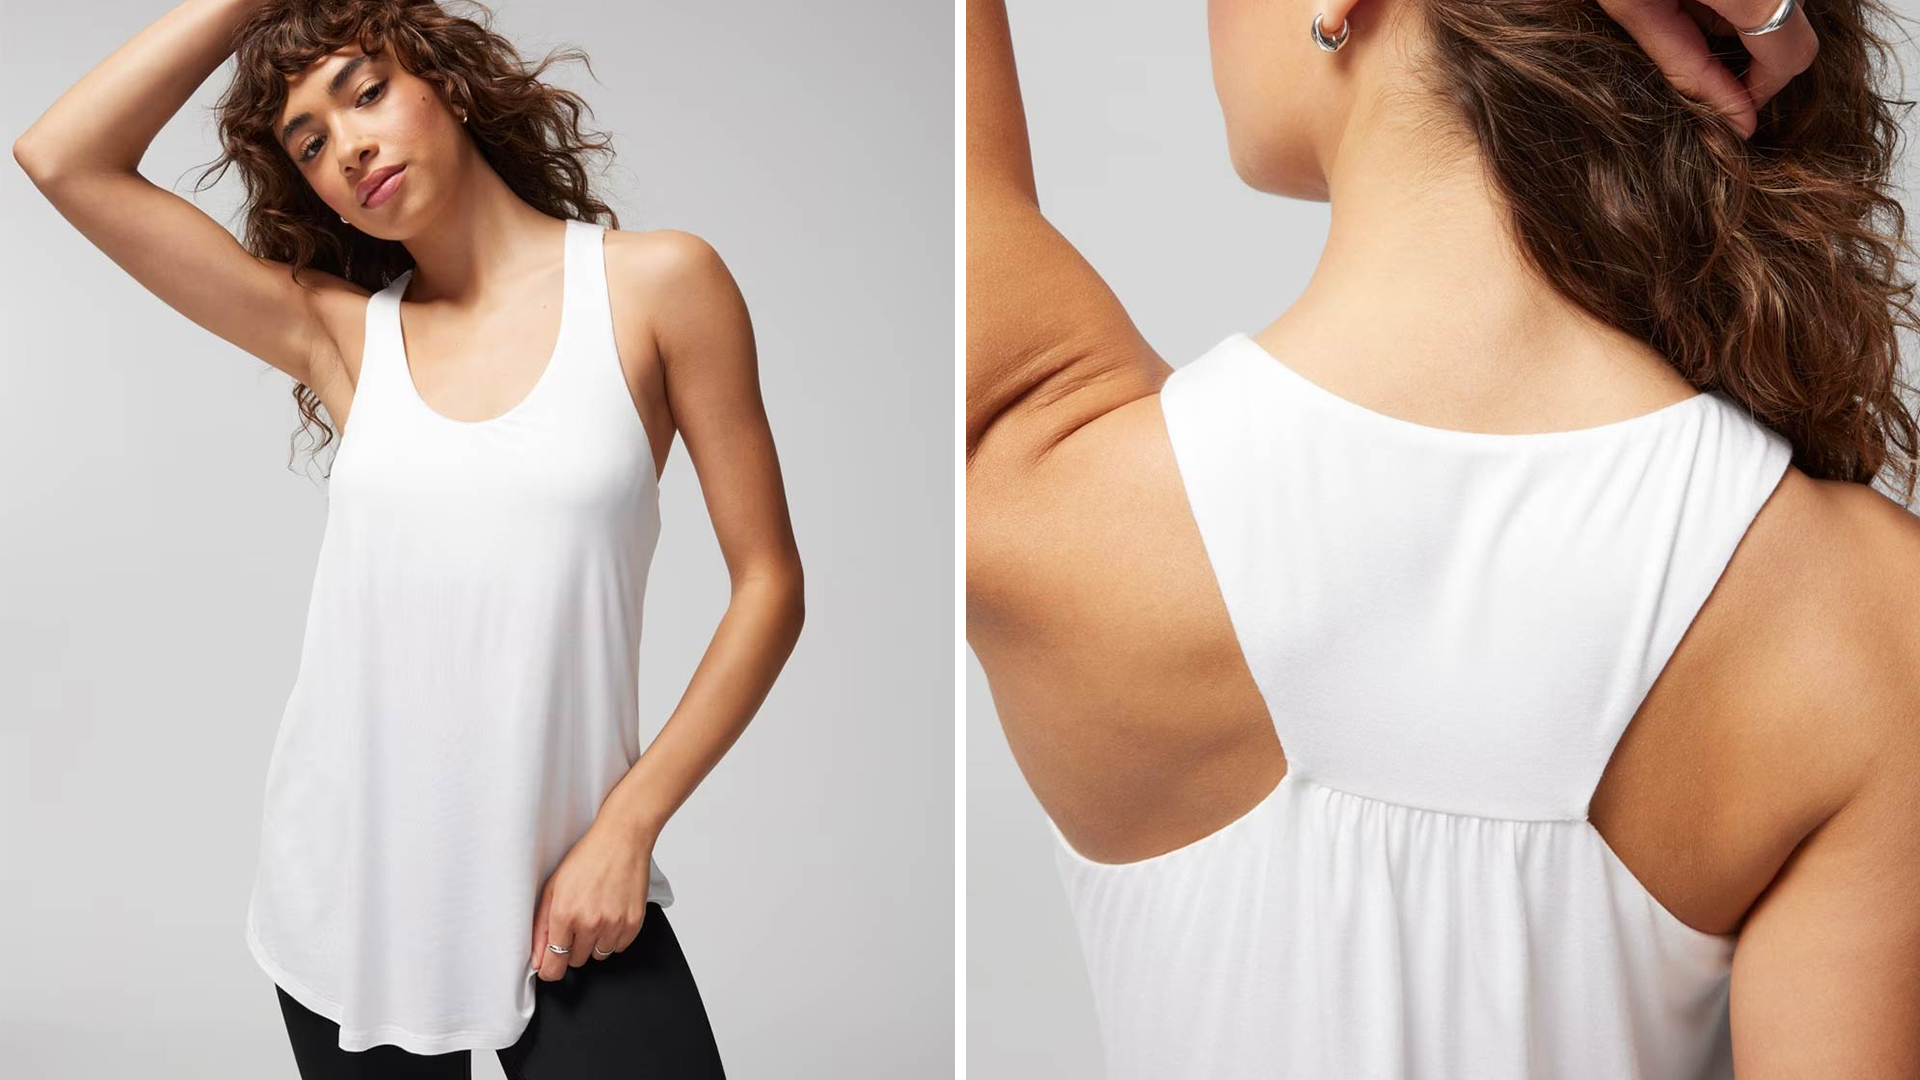 (Left) Soma<sup class=st-superscript>®</sup> women’s model wearing a white tank top and black leggings. (Right) Soma<sup class=st-superscript>®</sup> women’s model showcasing the back of a white racerback tank top.